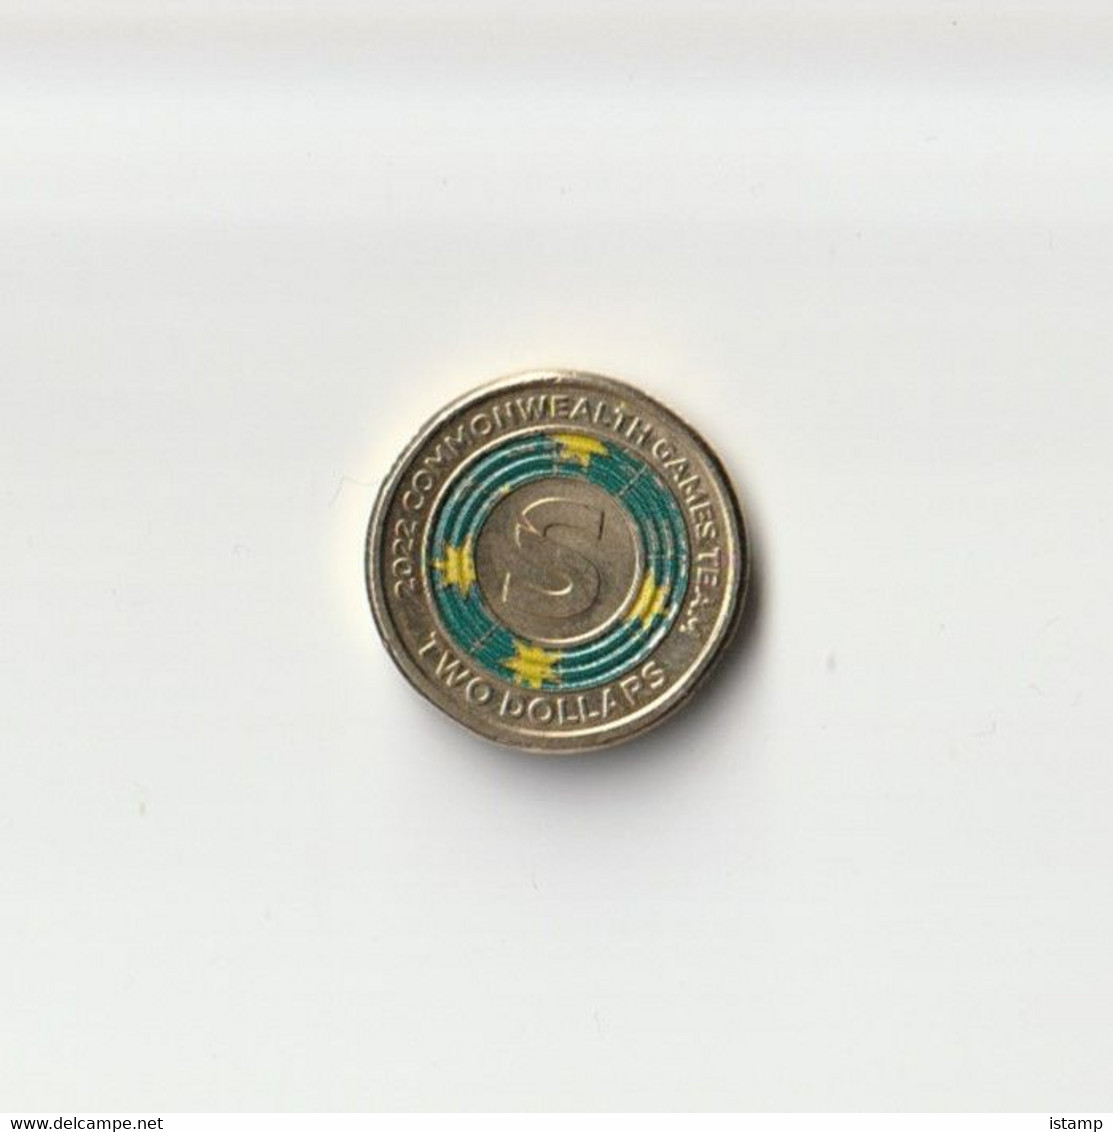 ⭐2022 - Australia COMMONWEALTH GAMES 'S' - $2 Coin Circulated⭐ - 2 Dollars